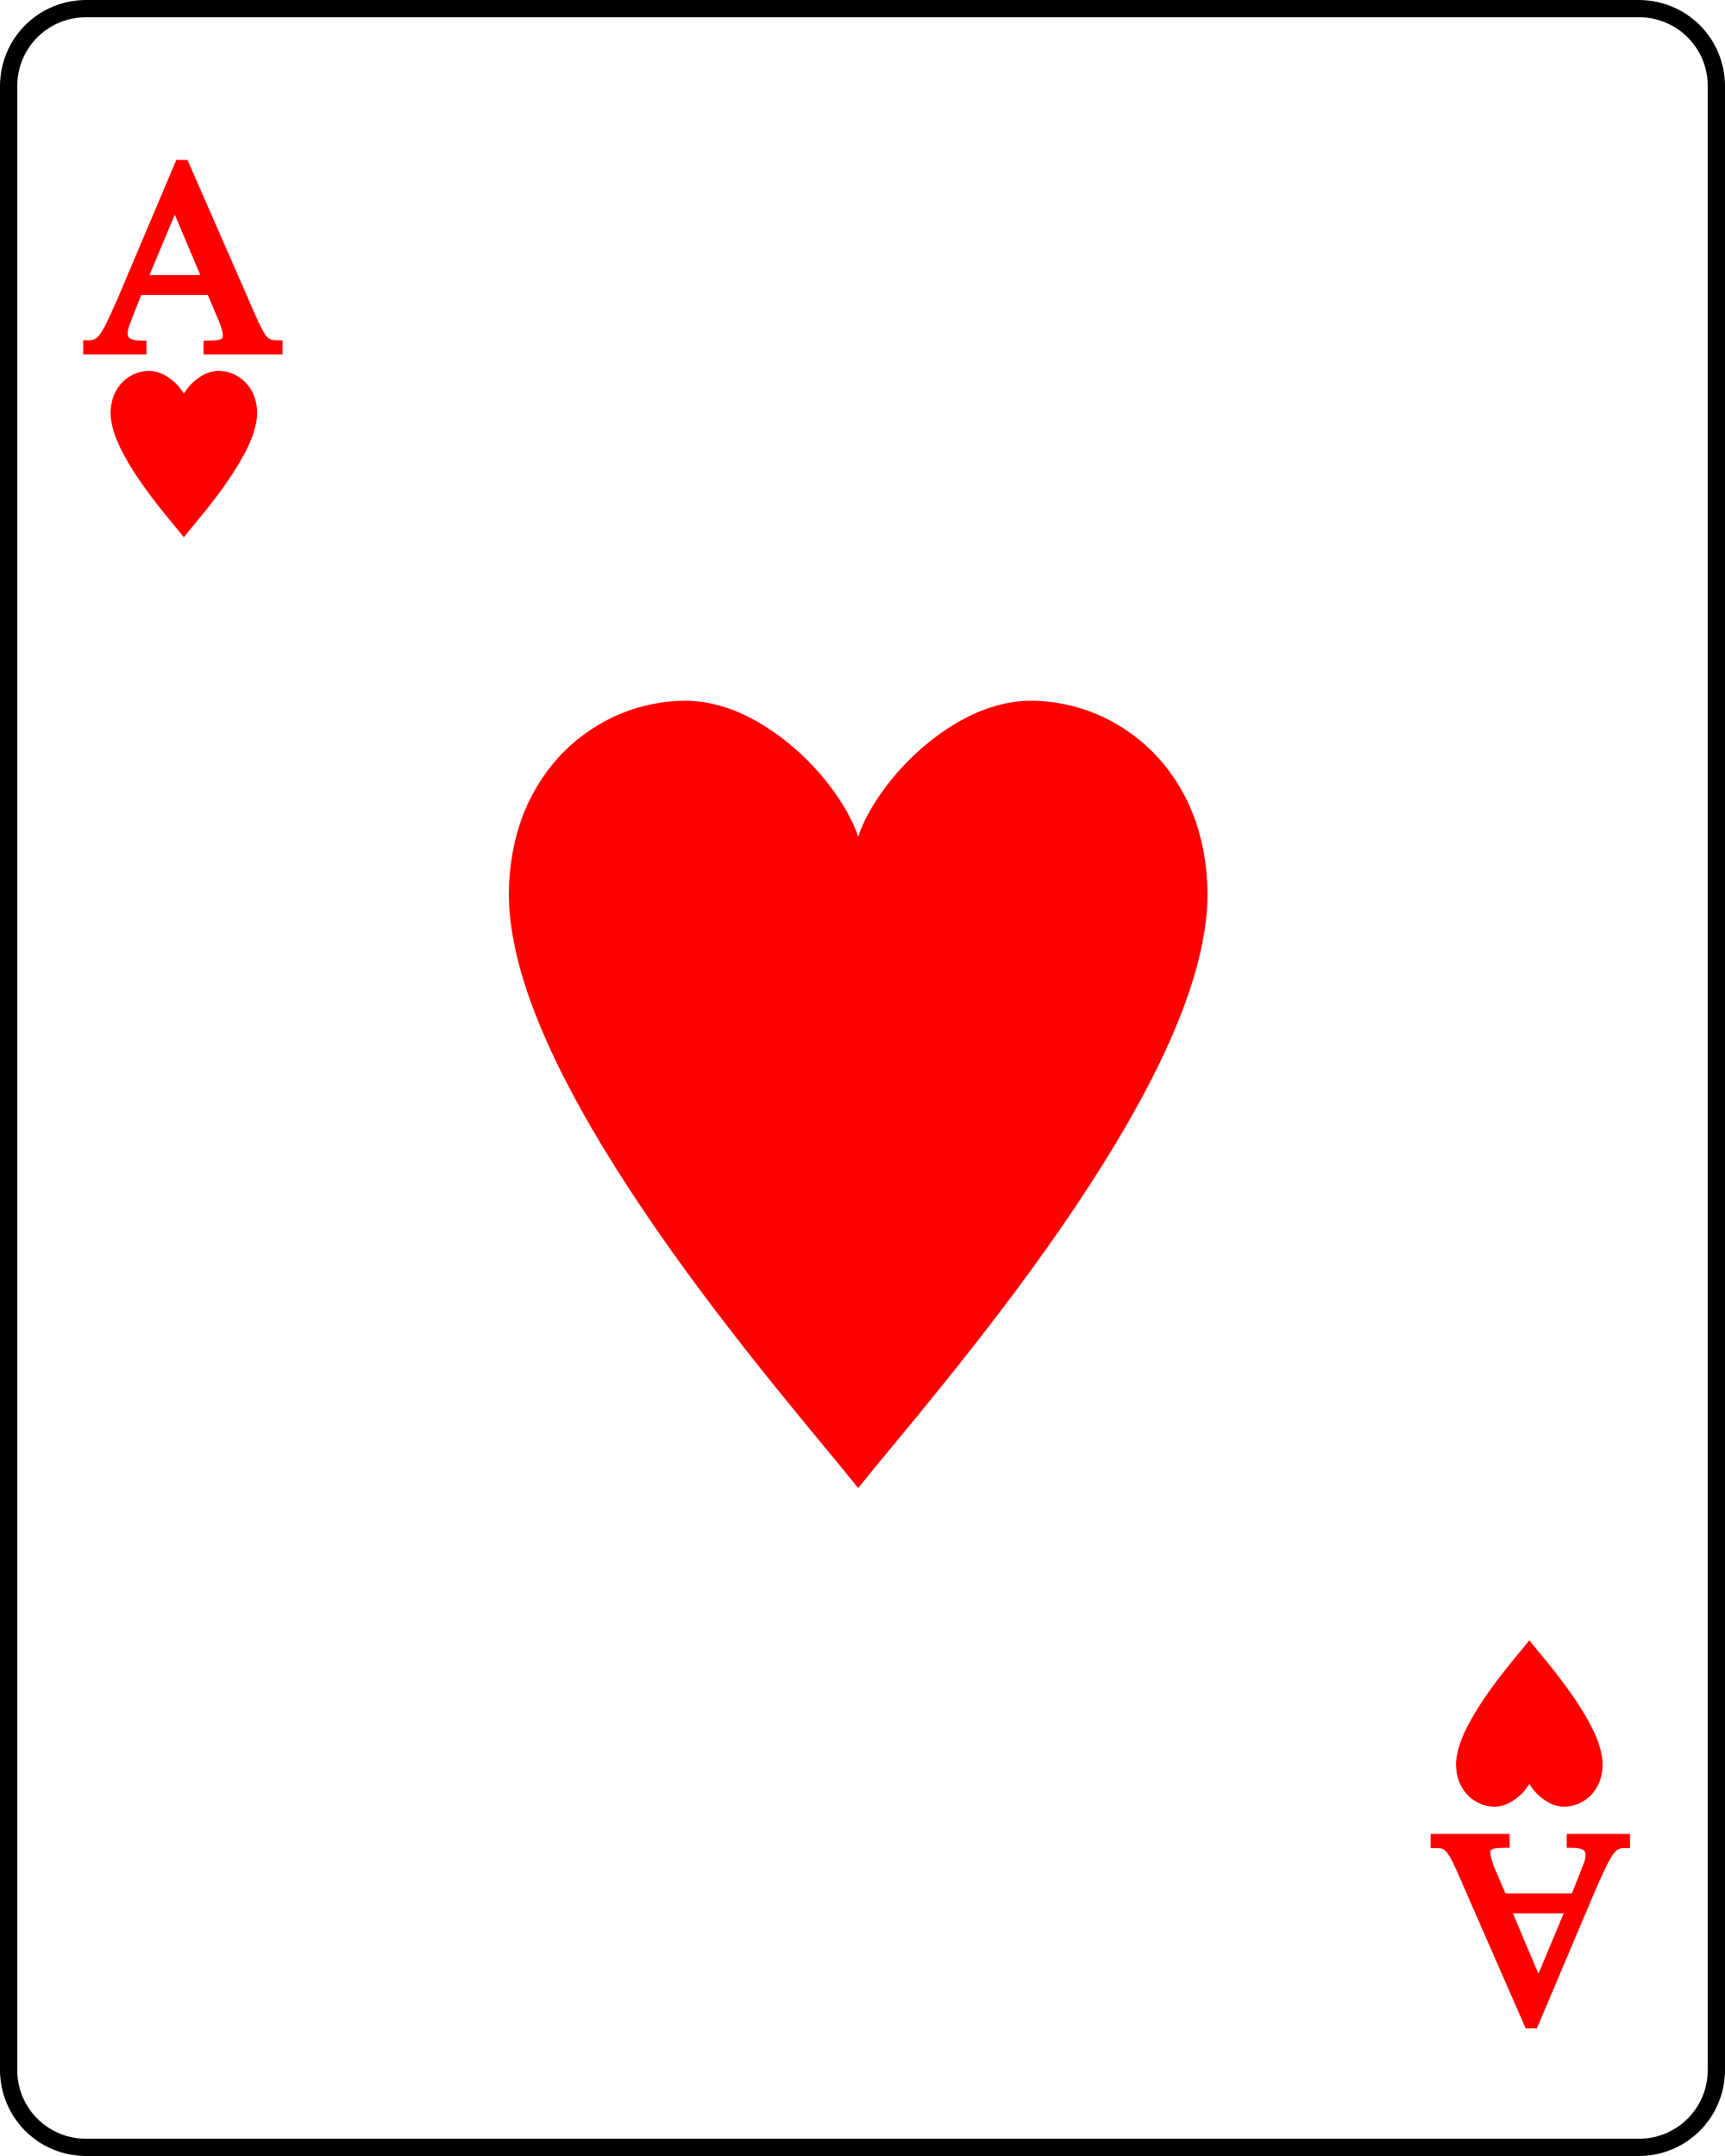 Ace Of Cards - ClipArt Best